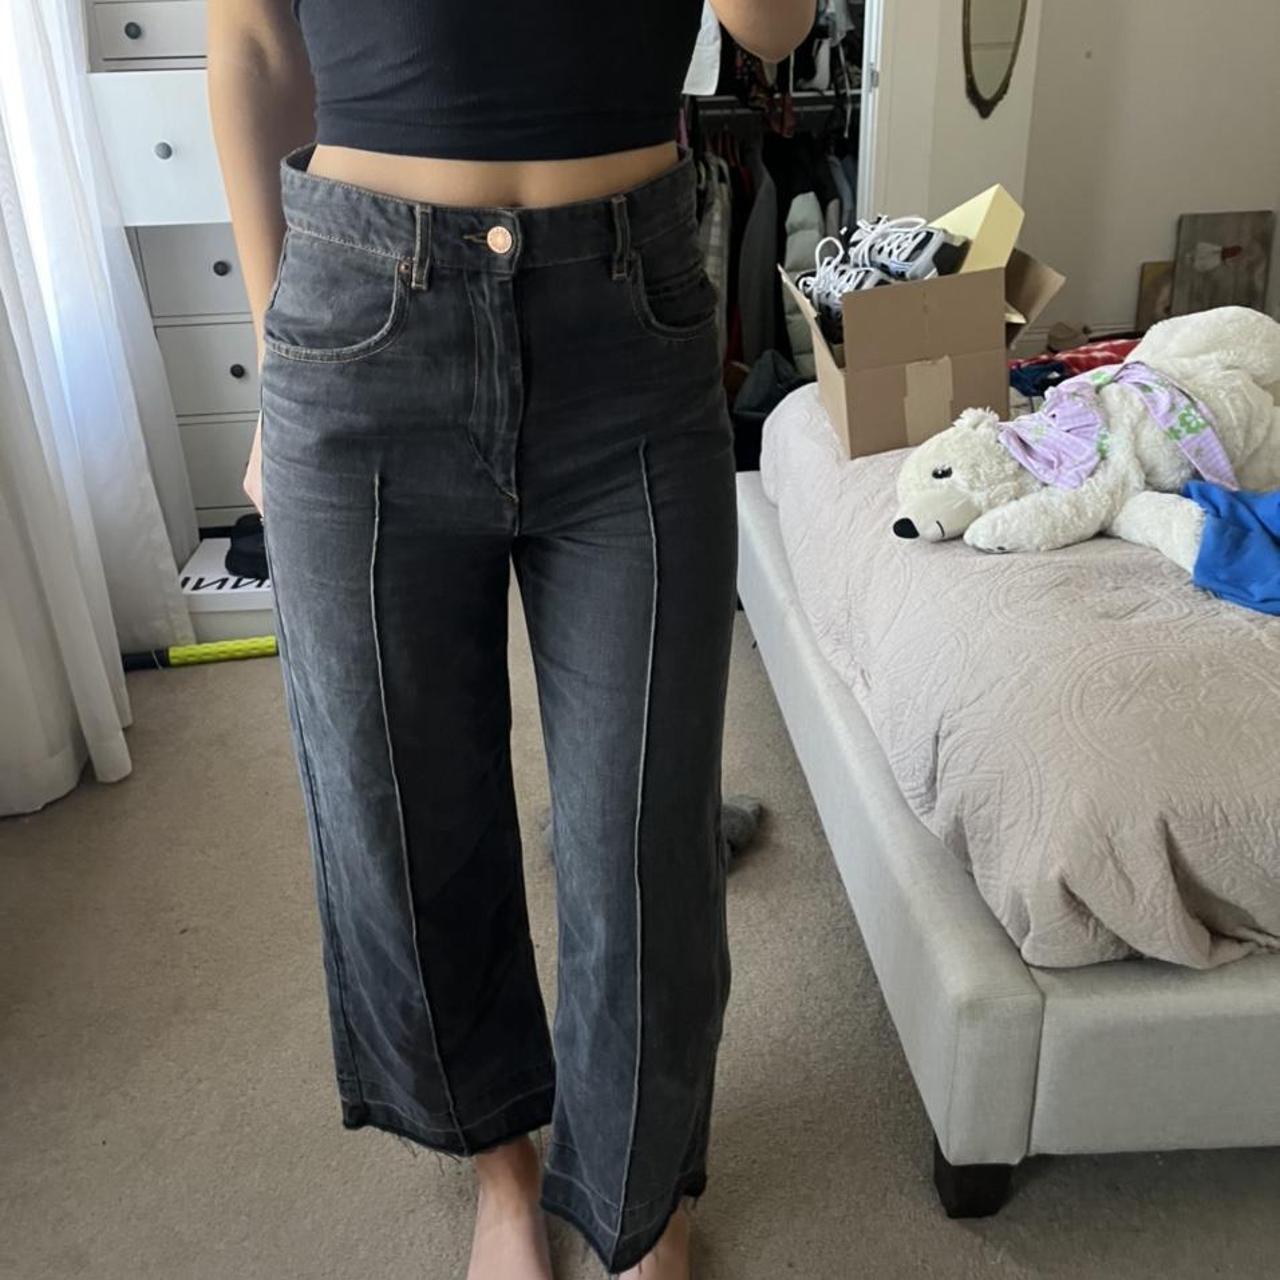 Isabel Marant Etoile Grey Cabrio jeans. bought a few... - Depop